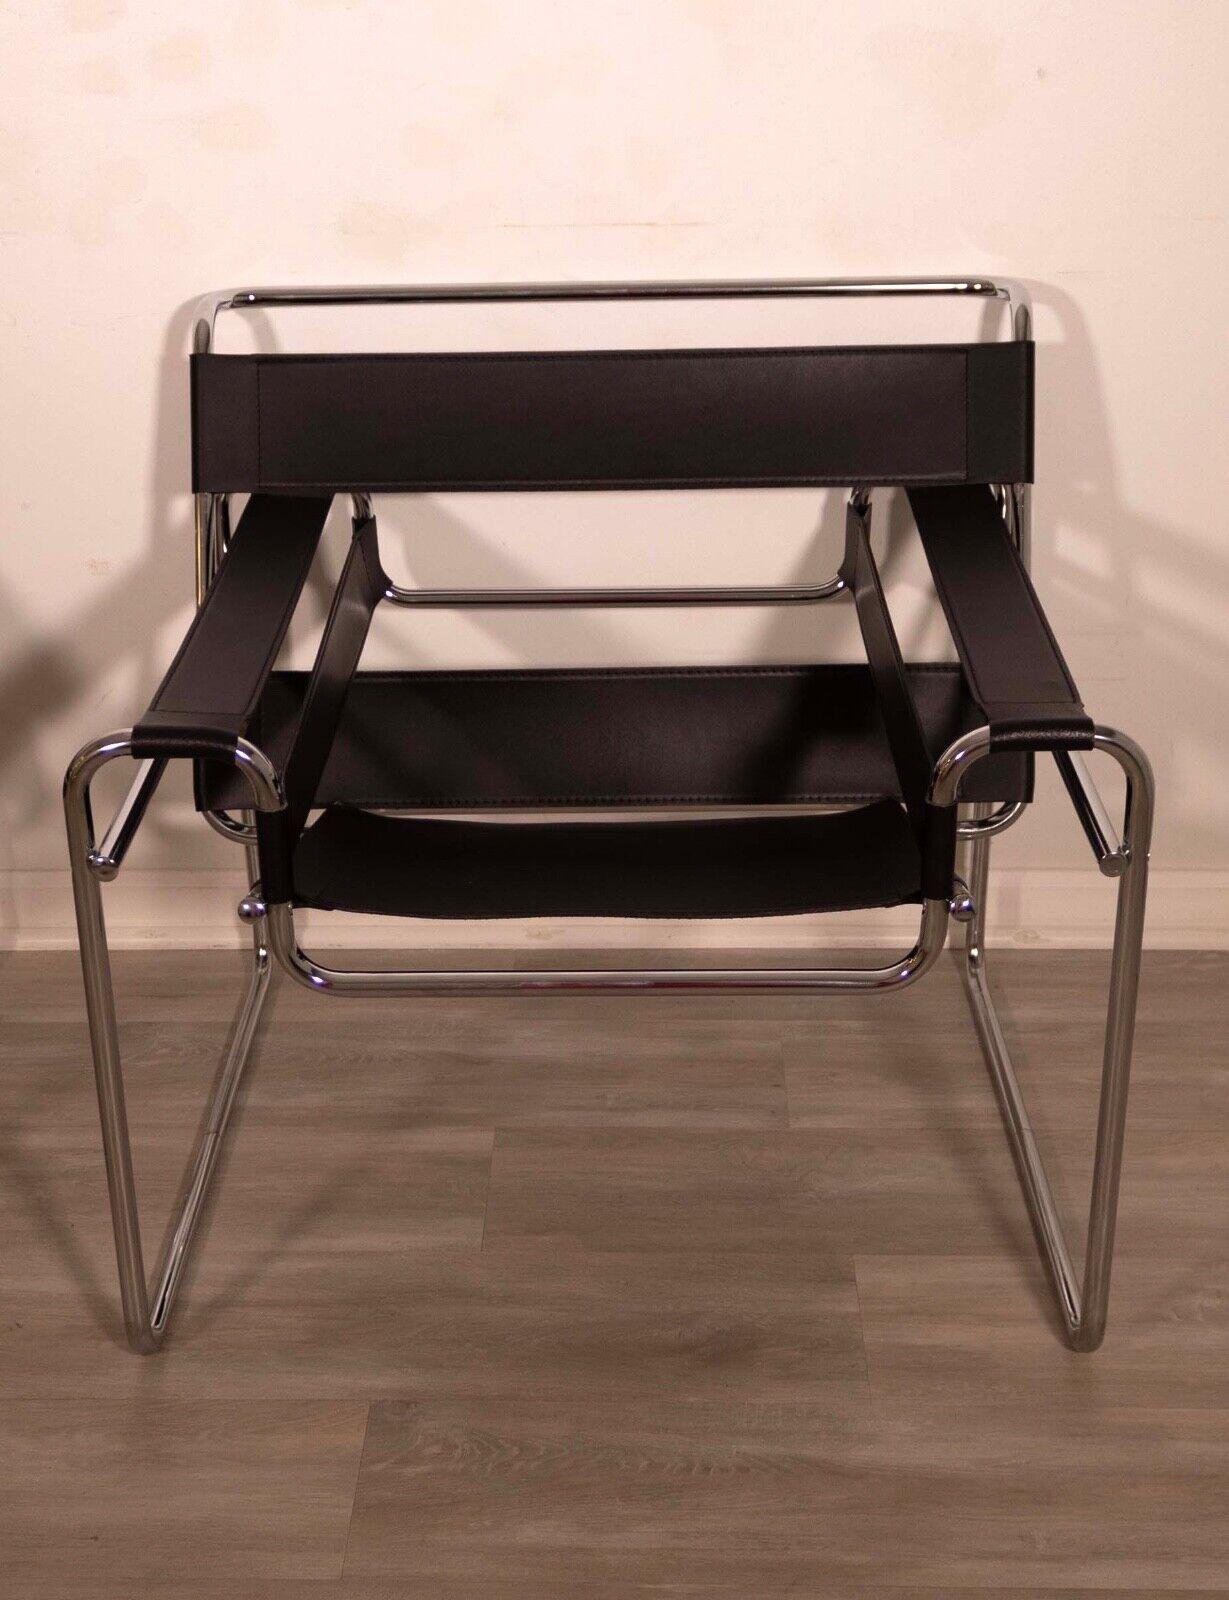 Pair of Vintage Black Leather and Chrome Wassily Style Chairs Mid Century Modern In Good Condition For Sale In Keego Harbor, MI